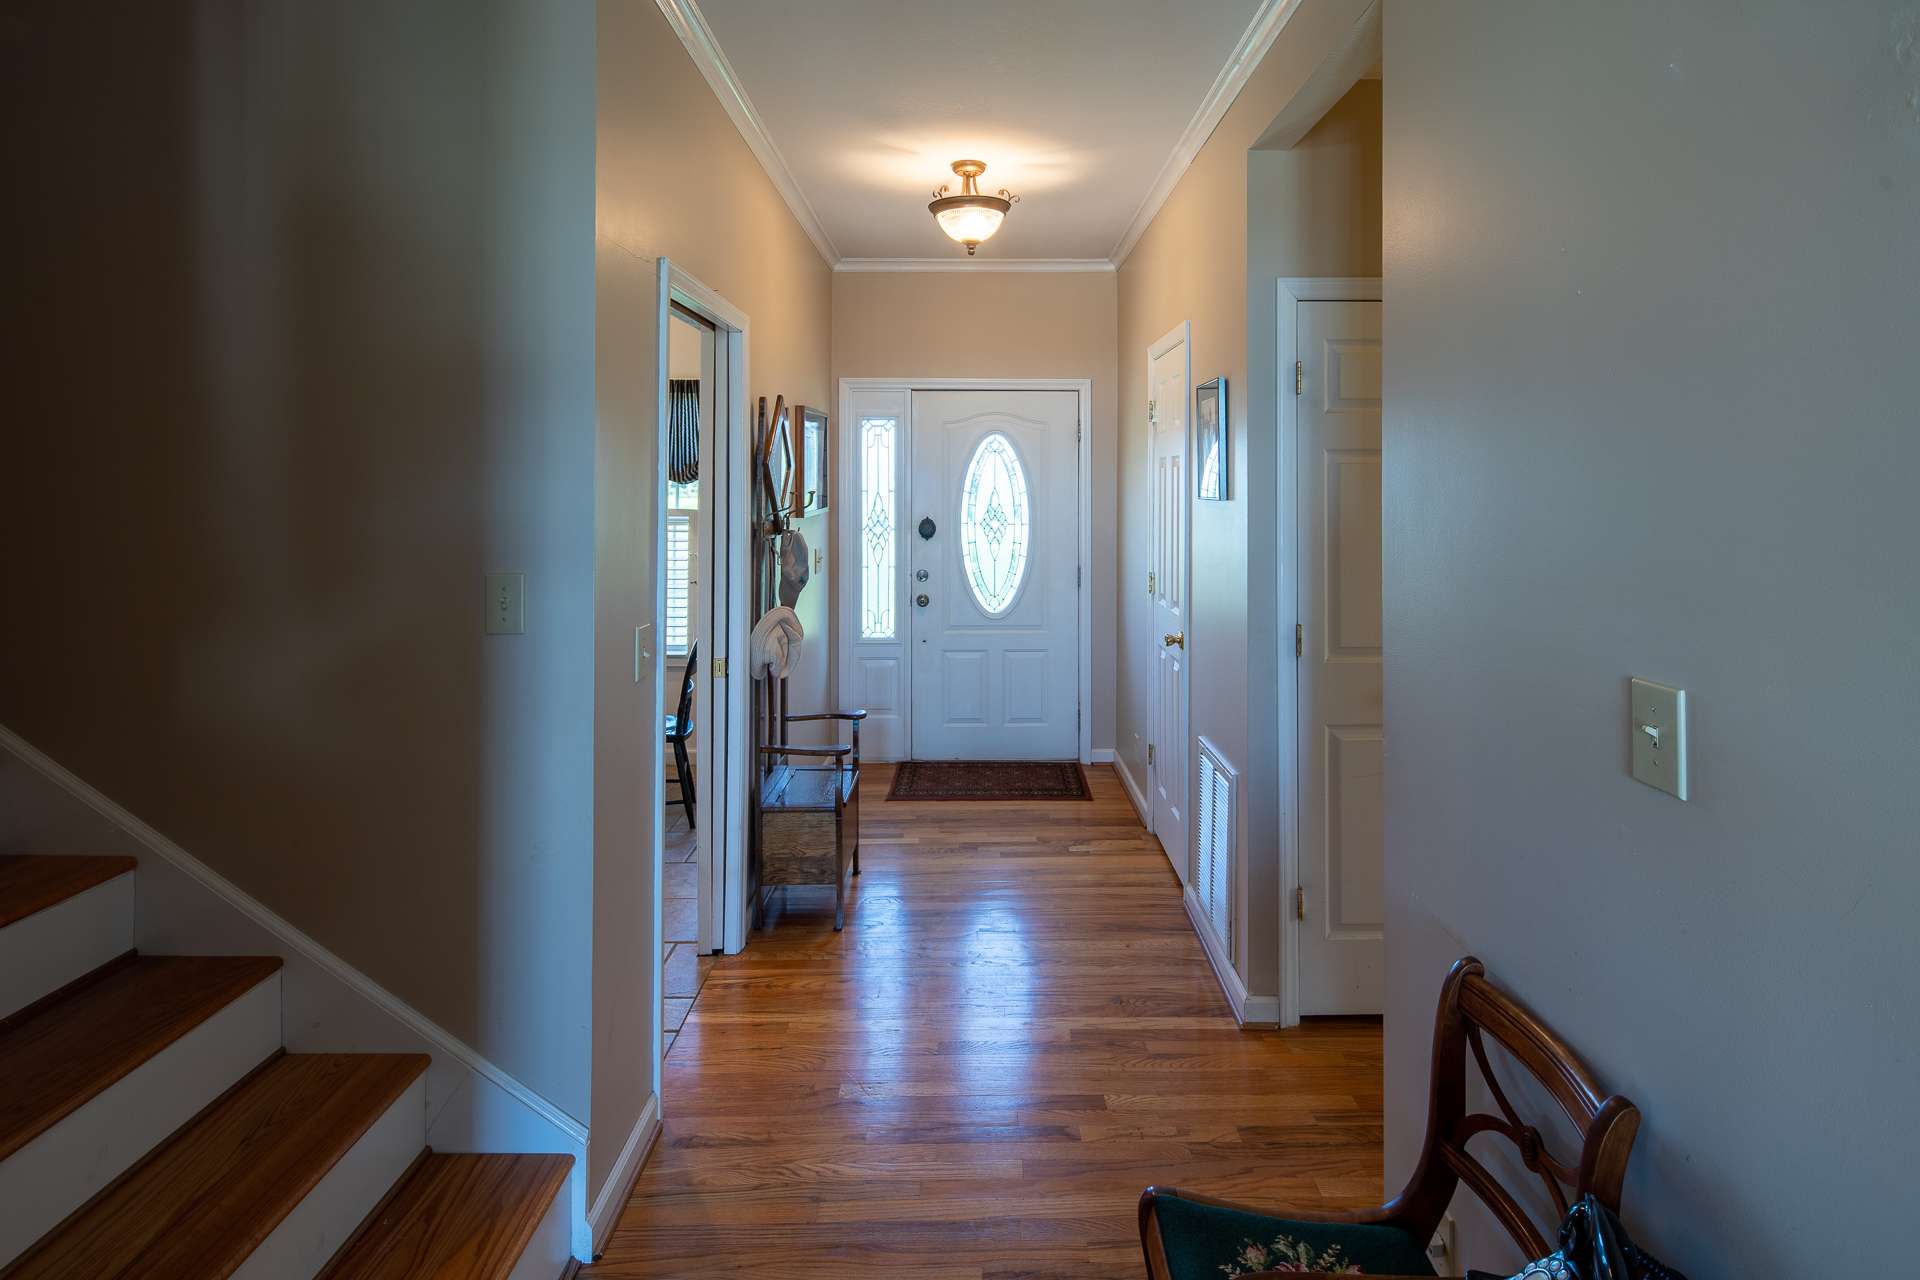 A welcoming foyer opens to the formal living area boasting beautiful hardwood floors.